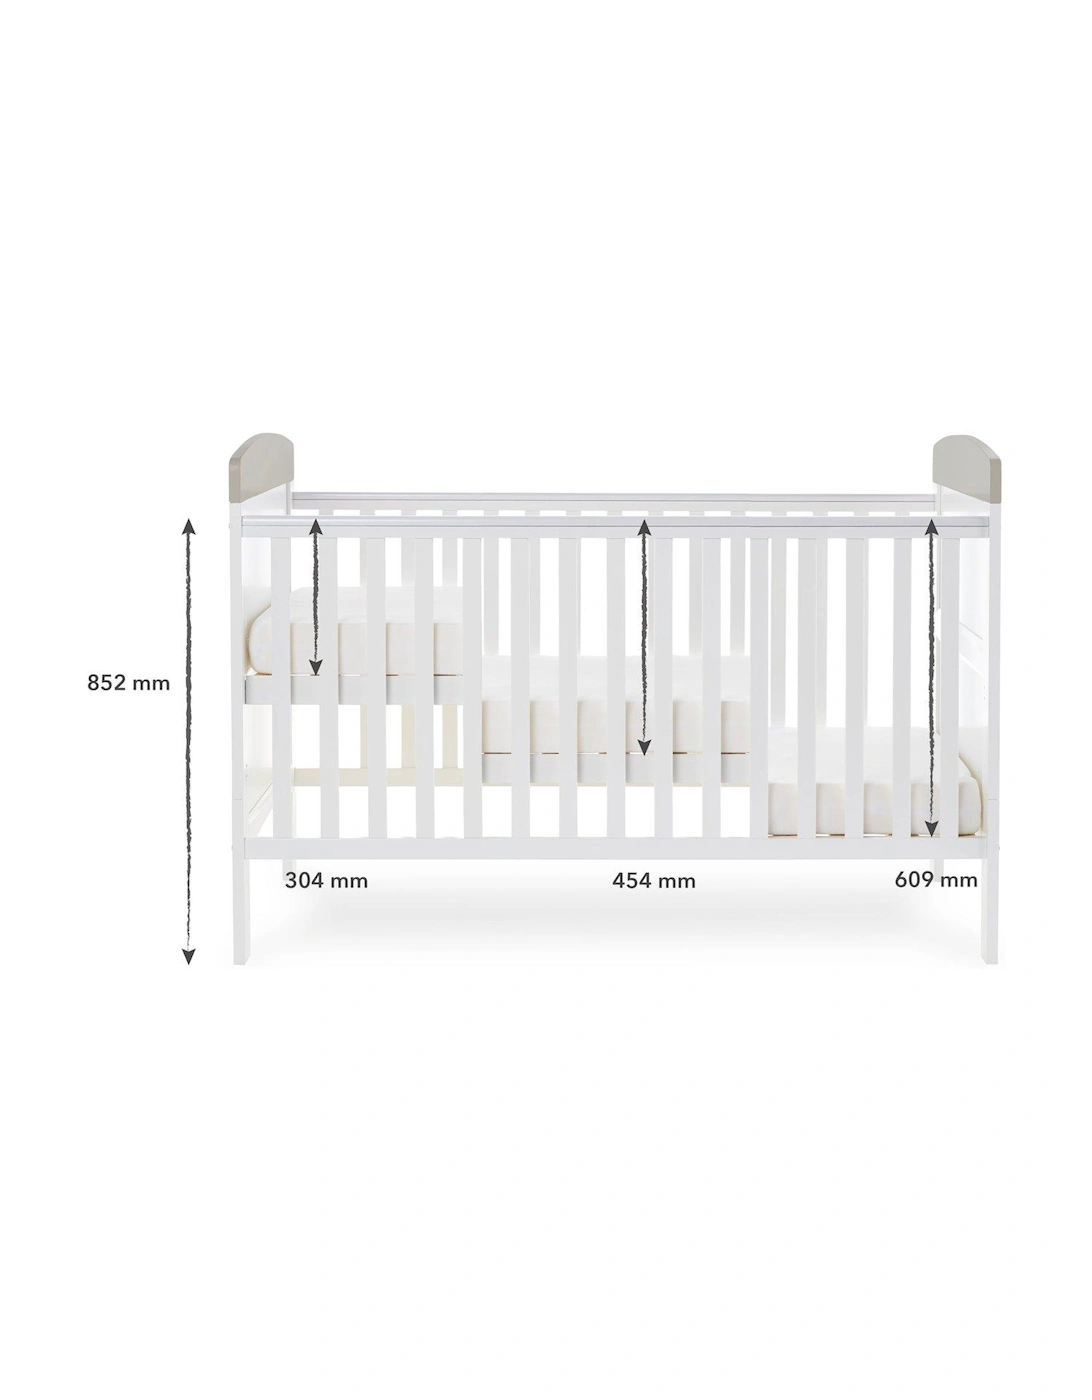 Guess How Much I Love You Cot Bed - To the Moon & Back